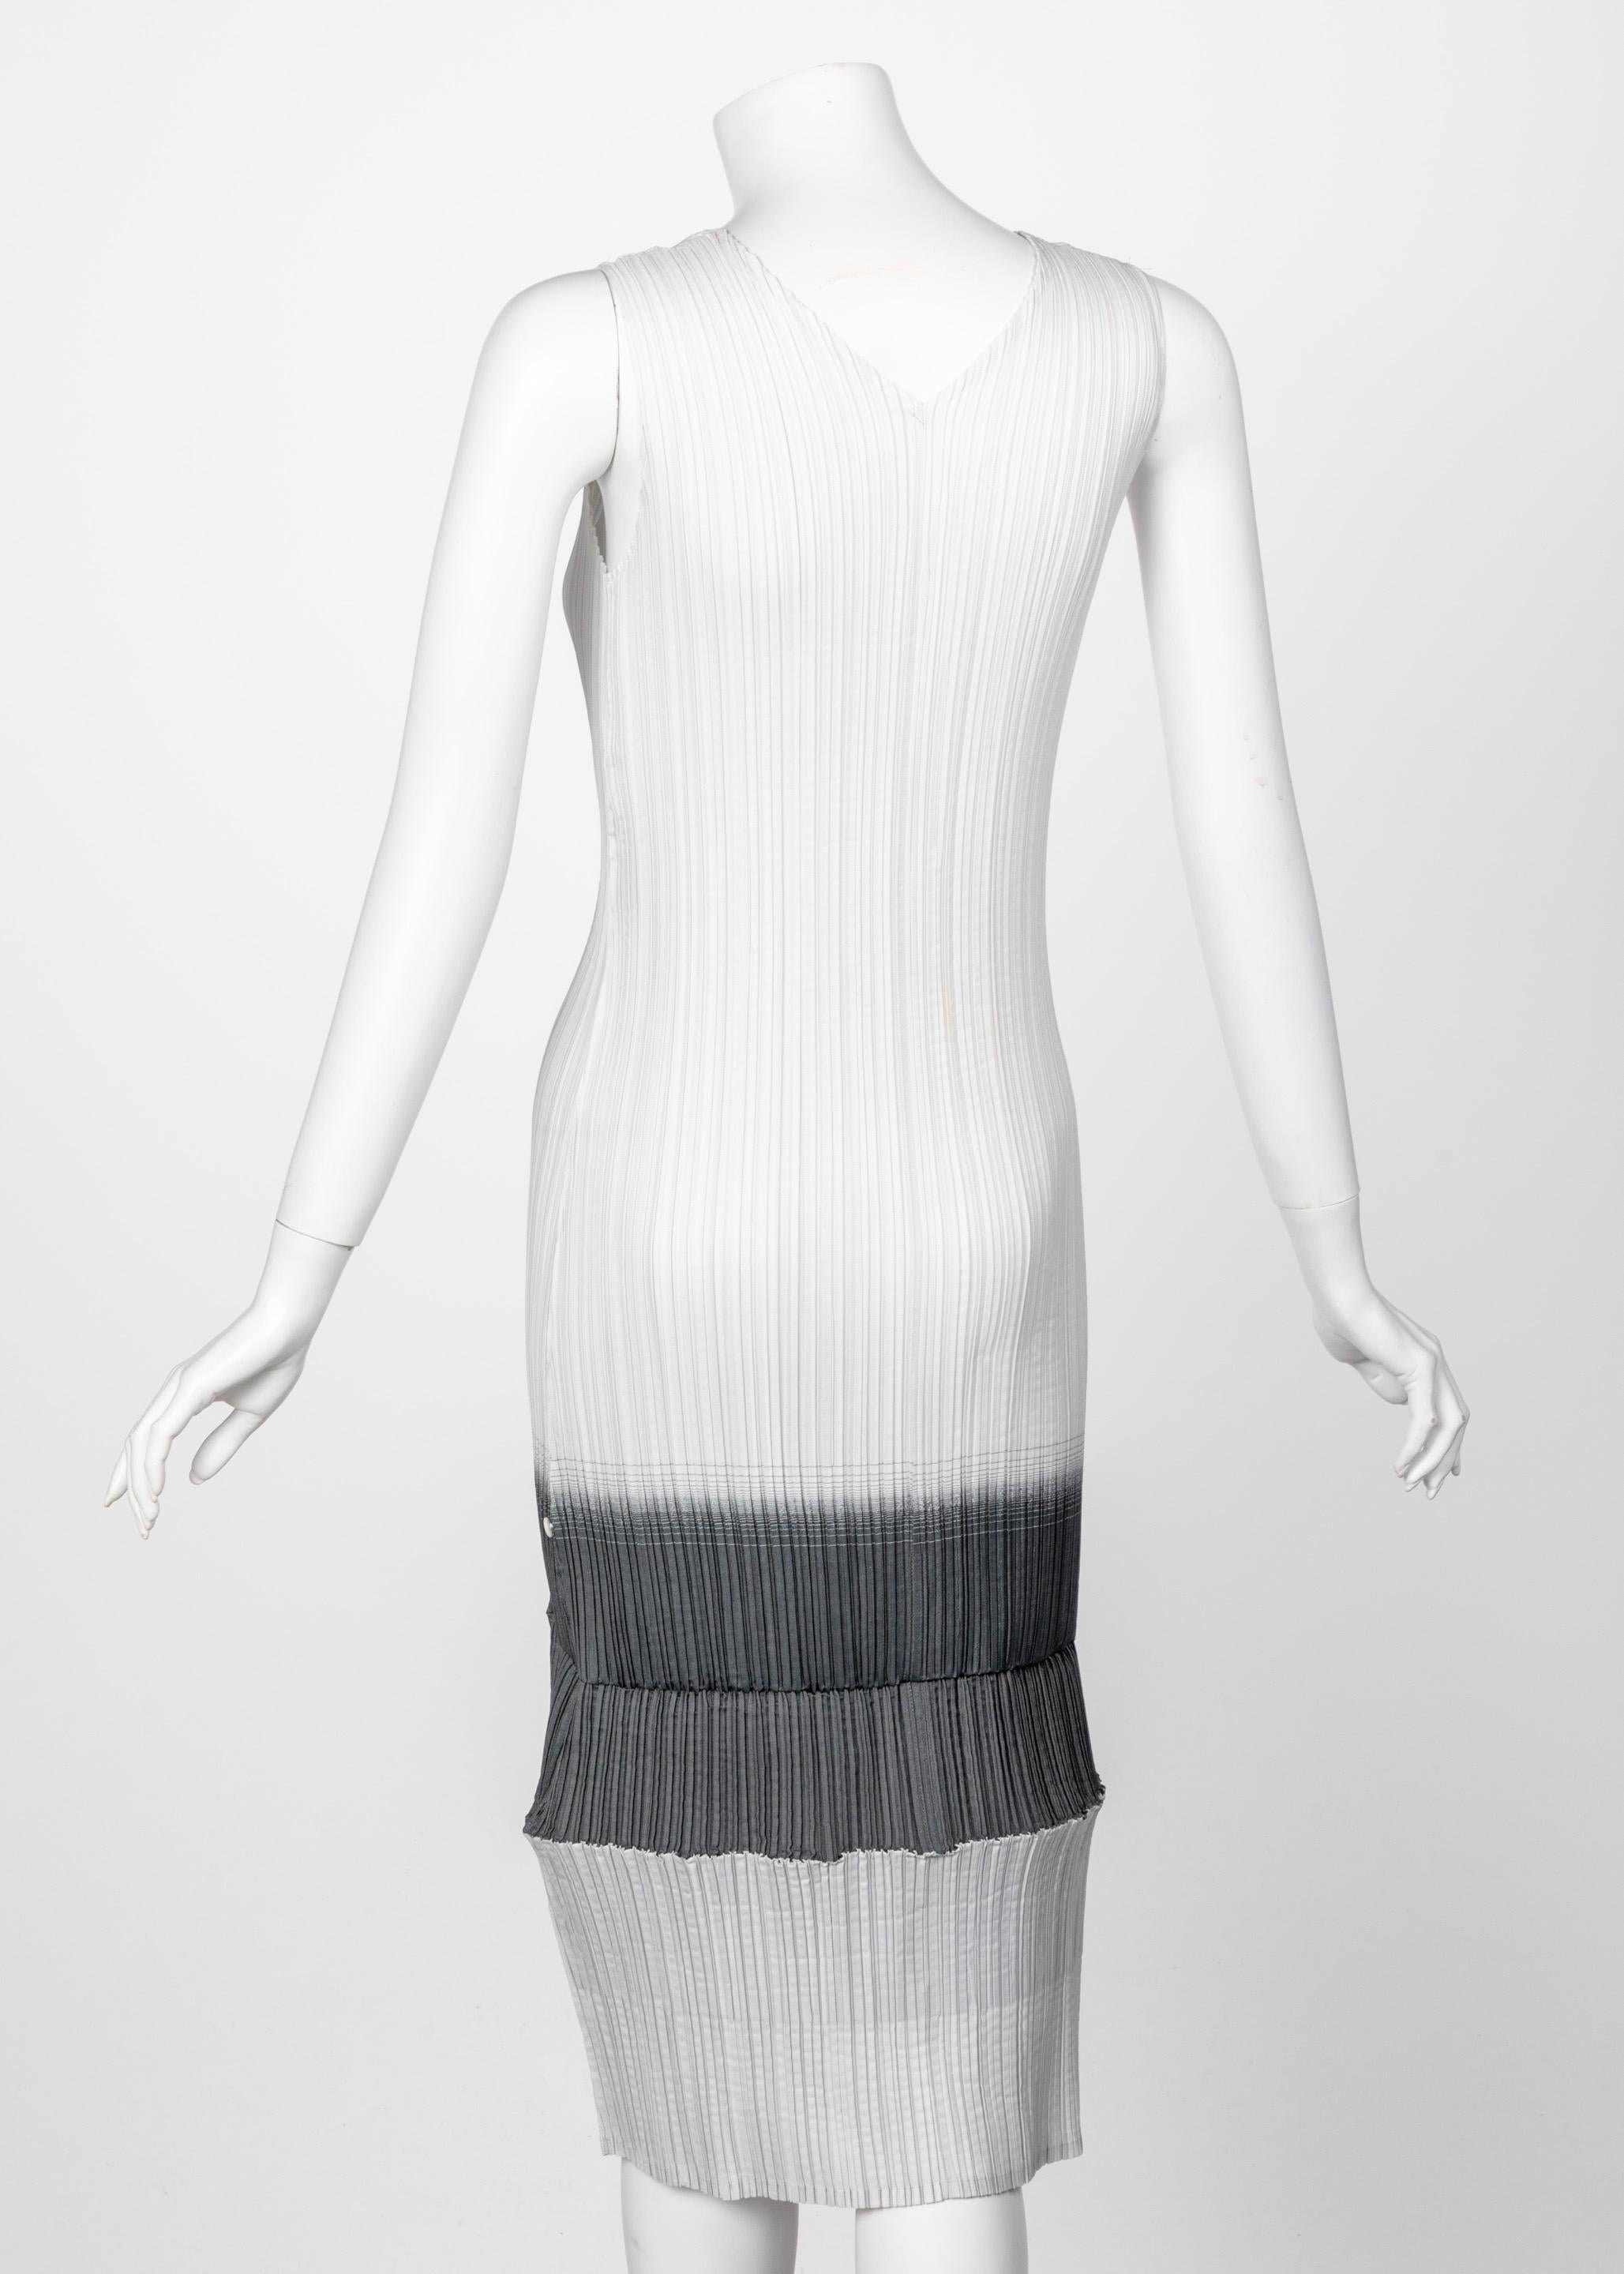 Women's or Men's Issey Miyake “A Piece of Cloth” 2-Way White Gray Sleeveless Sculptural Dress For Sale